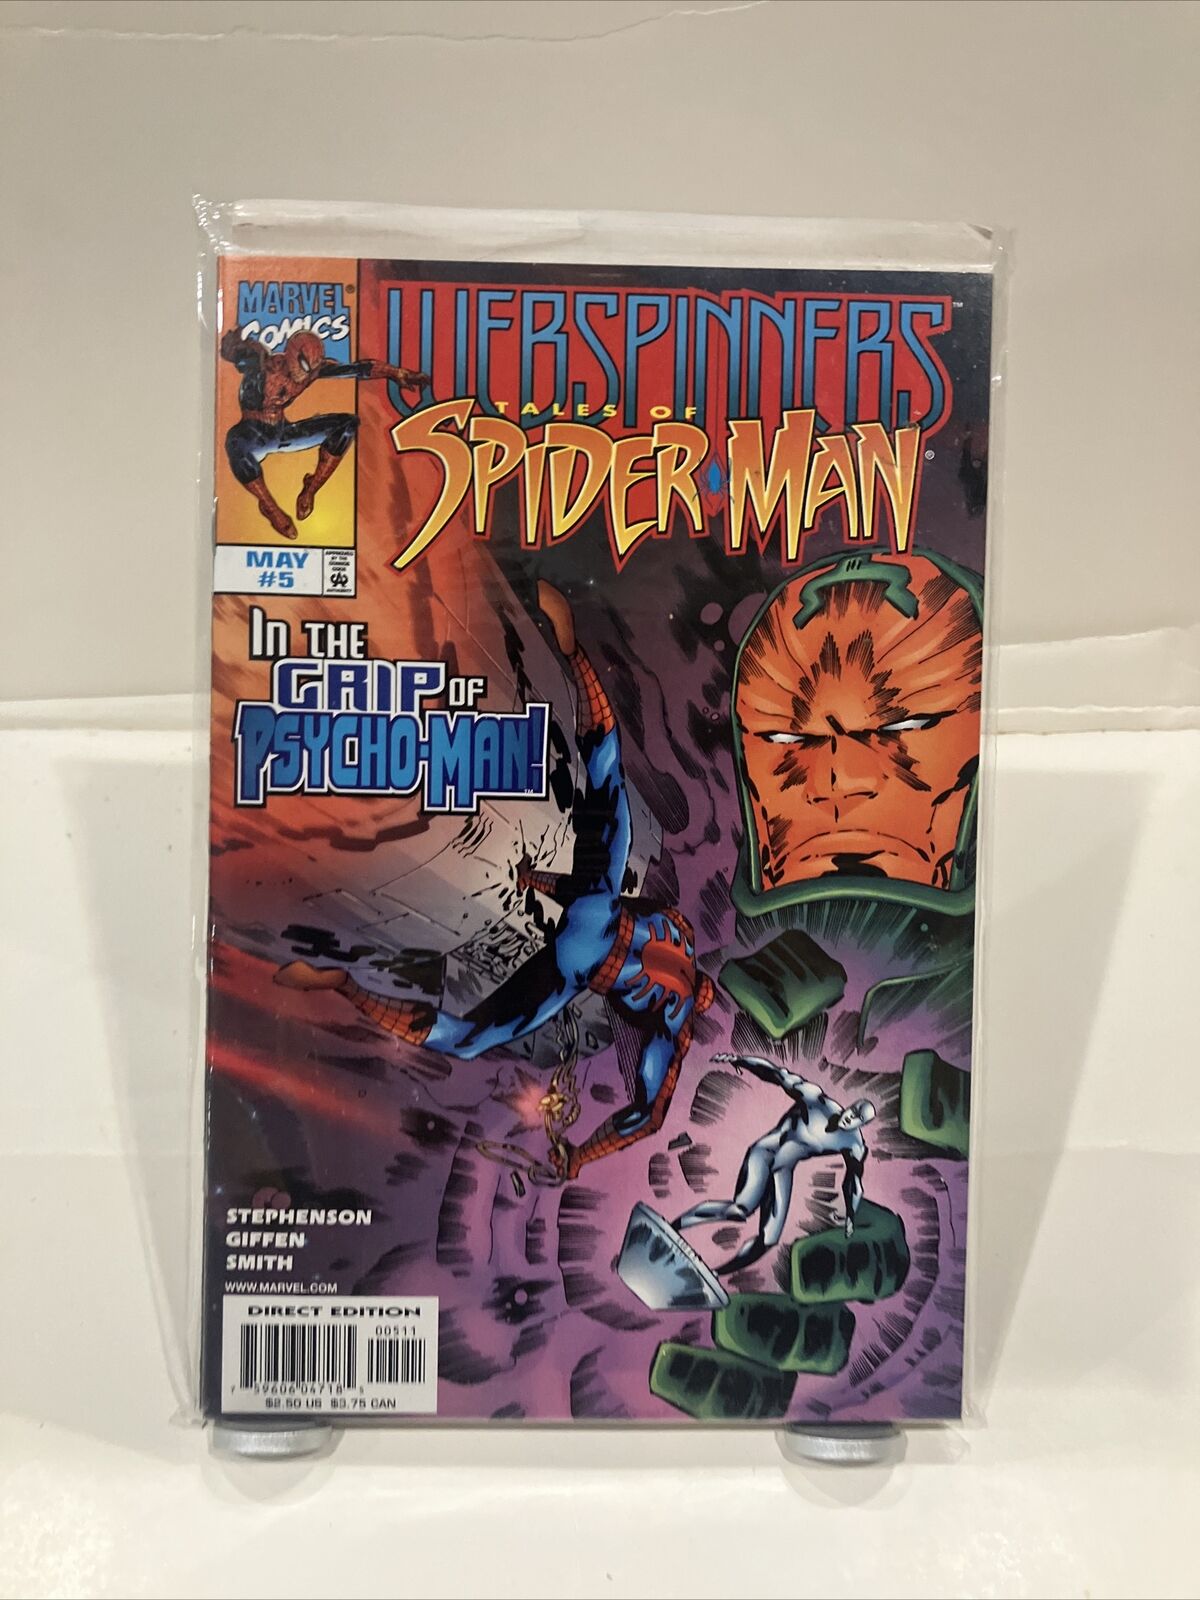 Webspinners Tales of Spiderman May #5 1999 Marvel Comics 